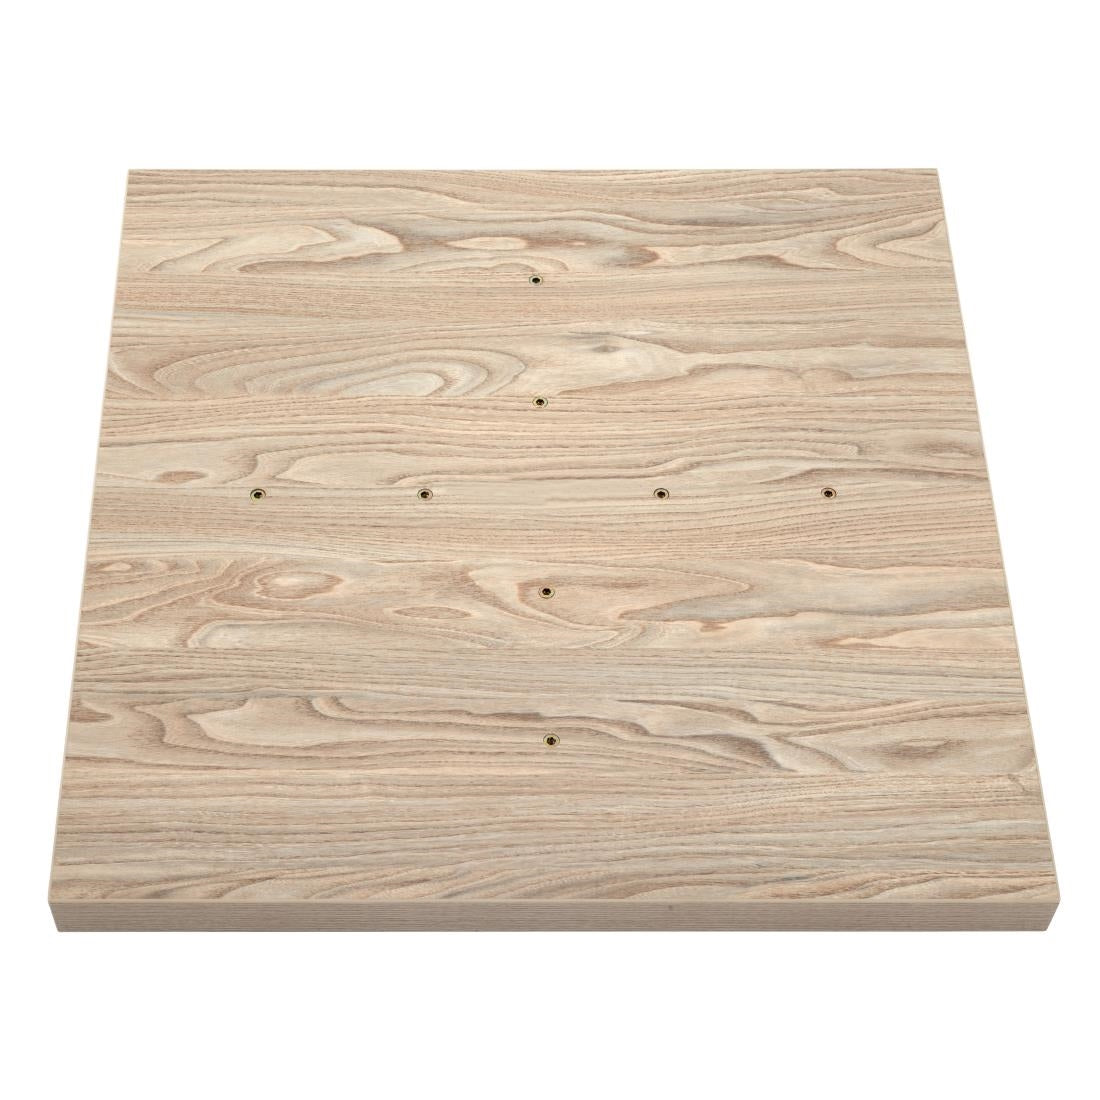 Bolero Pre-drilled Square Table Top Antique Natural 700mm JD Catering Equipment Solutions Ltd